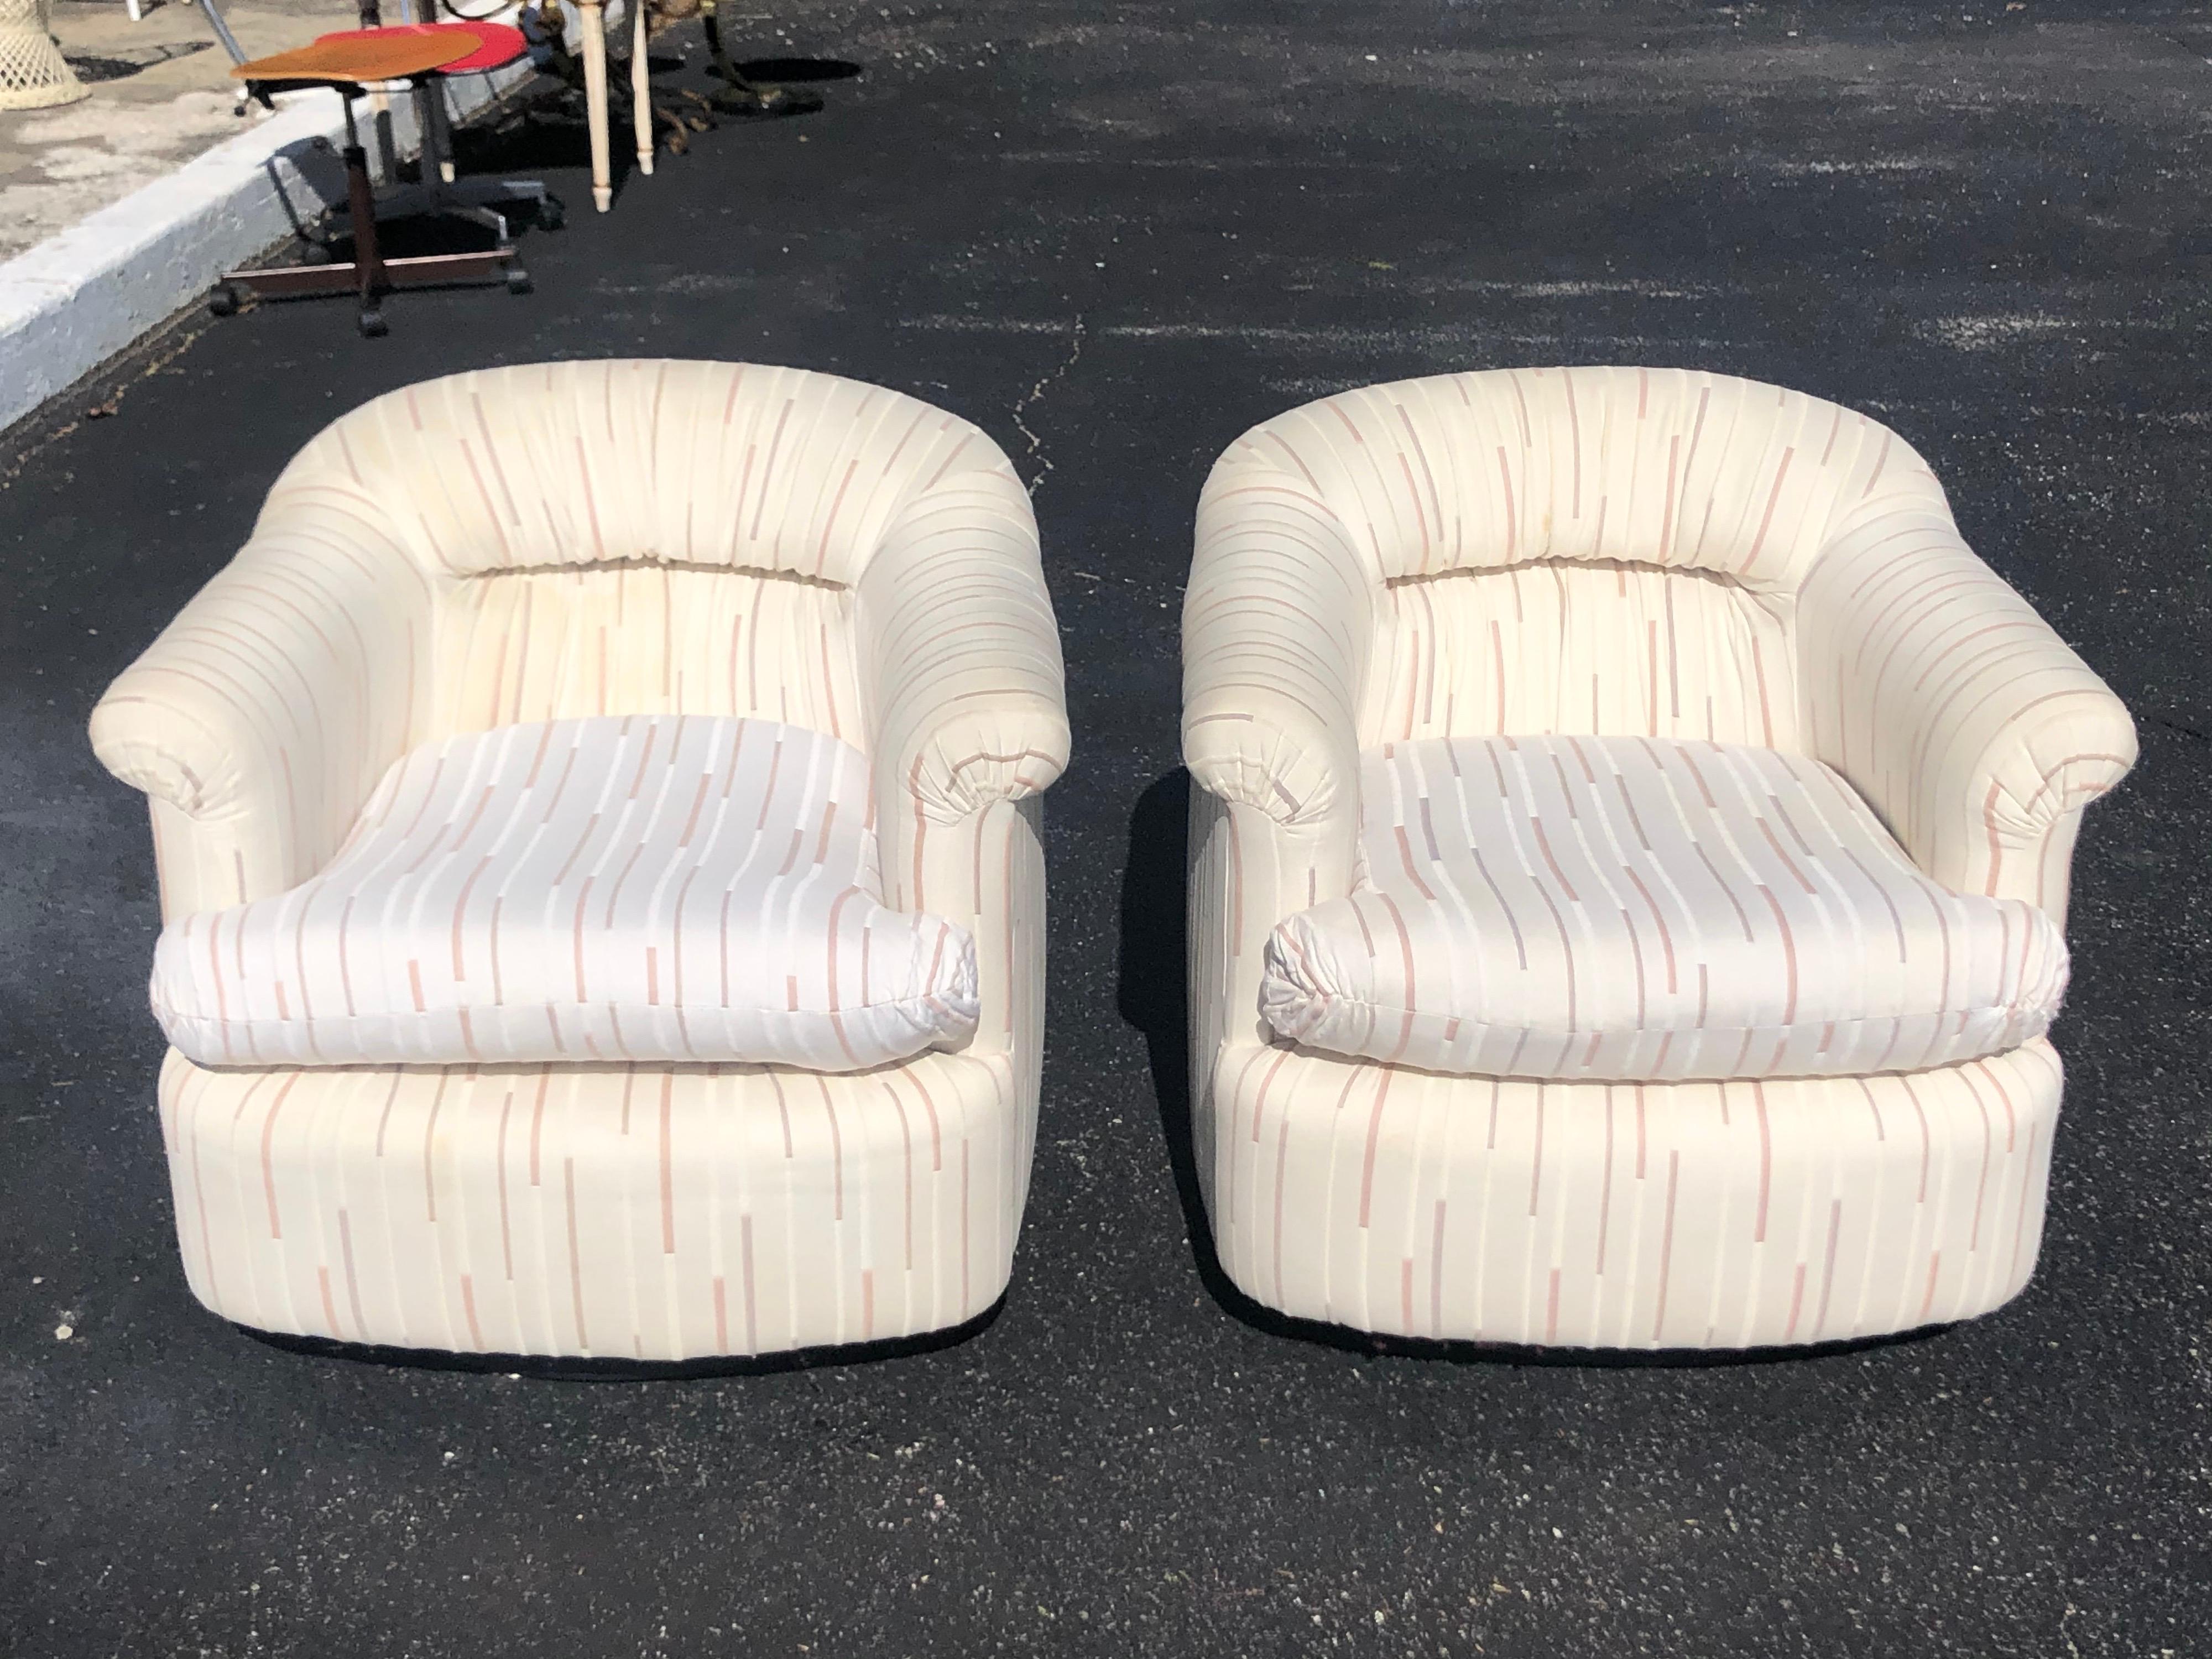 Pair of 1980's Swivel club chairs. Fun, comfortable, designer chairs. Seat depth is 20